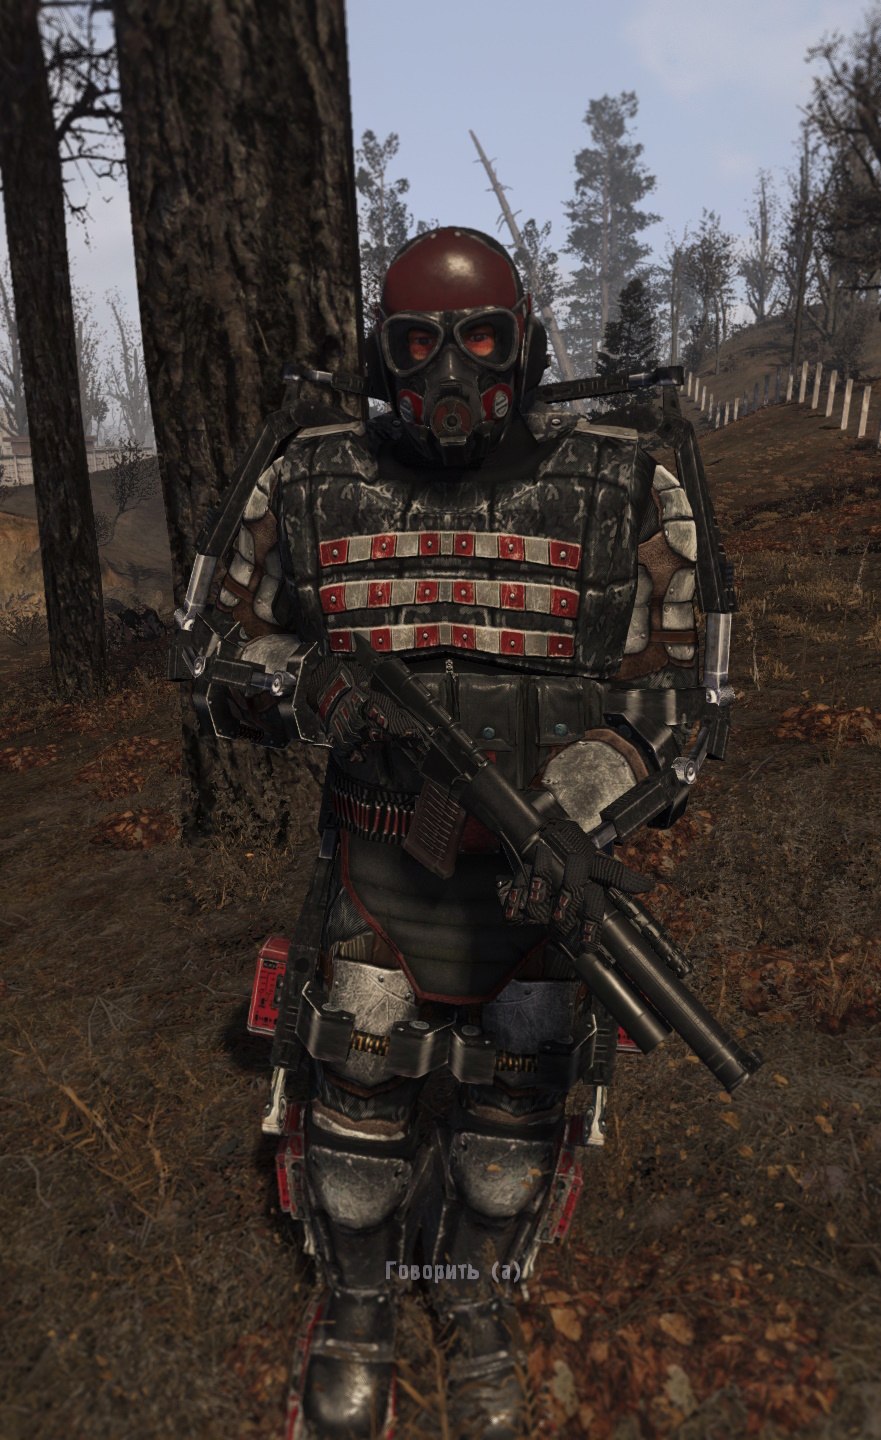 Exoskeletons HD Remastered v2.4 addon - S.T.A.L.K.E.R. Anomaly mod for ...